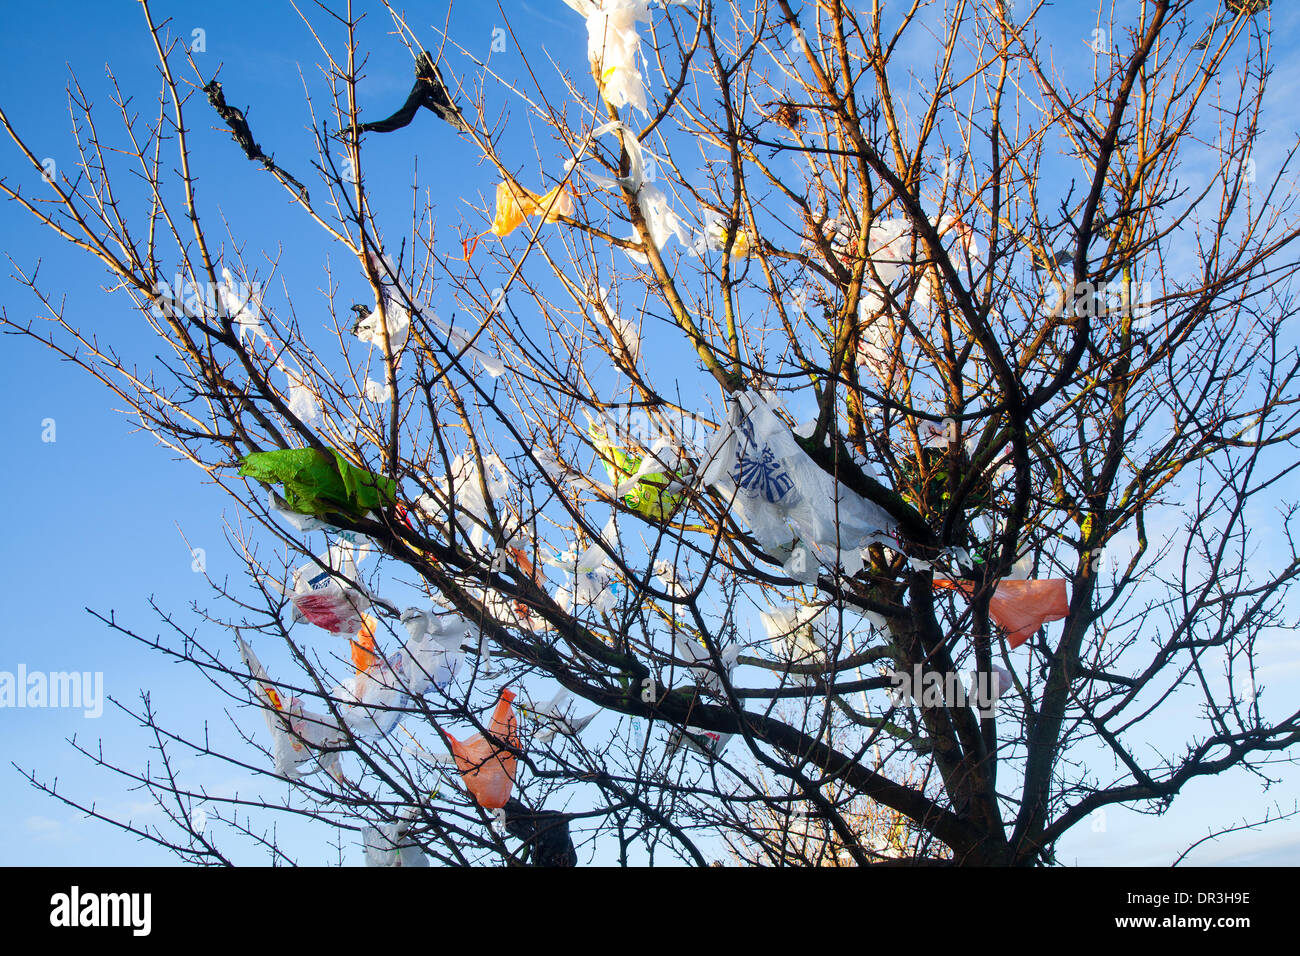 Plastic supermarket bags caught in tree branches; Southport, Merseyside, UK. January, 2014.  UK Weather. Swirling winds and blustery conditions around the Tesco recycling bays at Kew, deposit, adorn and festoon nearby trees with a myriad of varied plastic bags that have escaped caught seemingly forever in the unreachable tree branches, littering the landscape with the detritus of our inconsiderate waste.   In some countries people ironically refer to plastic bags caught in fences and trees as the “national flower', whereas in the UK they are known as “witches' britches”. Stock Photo